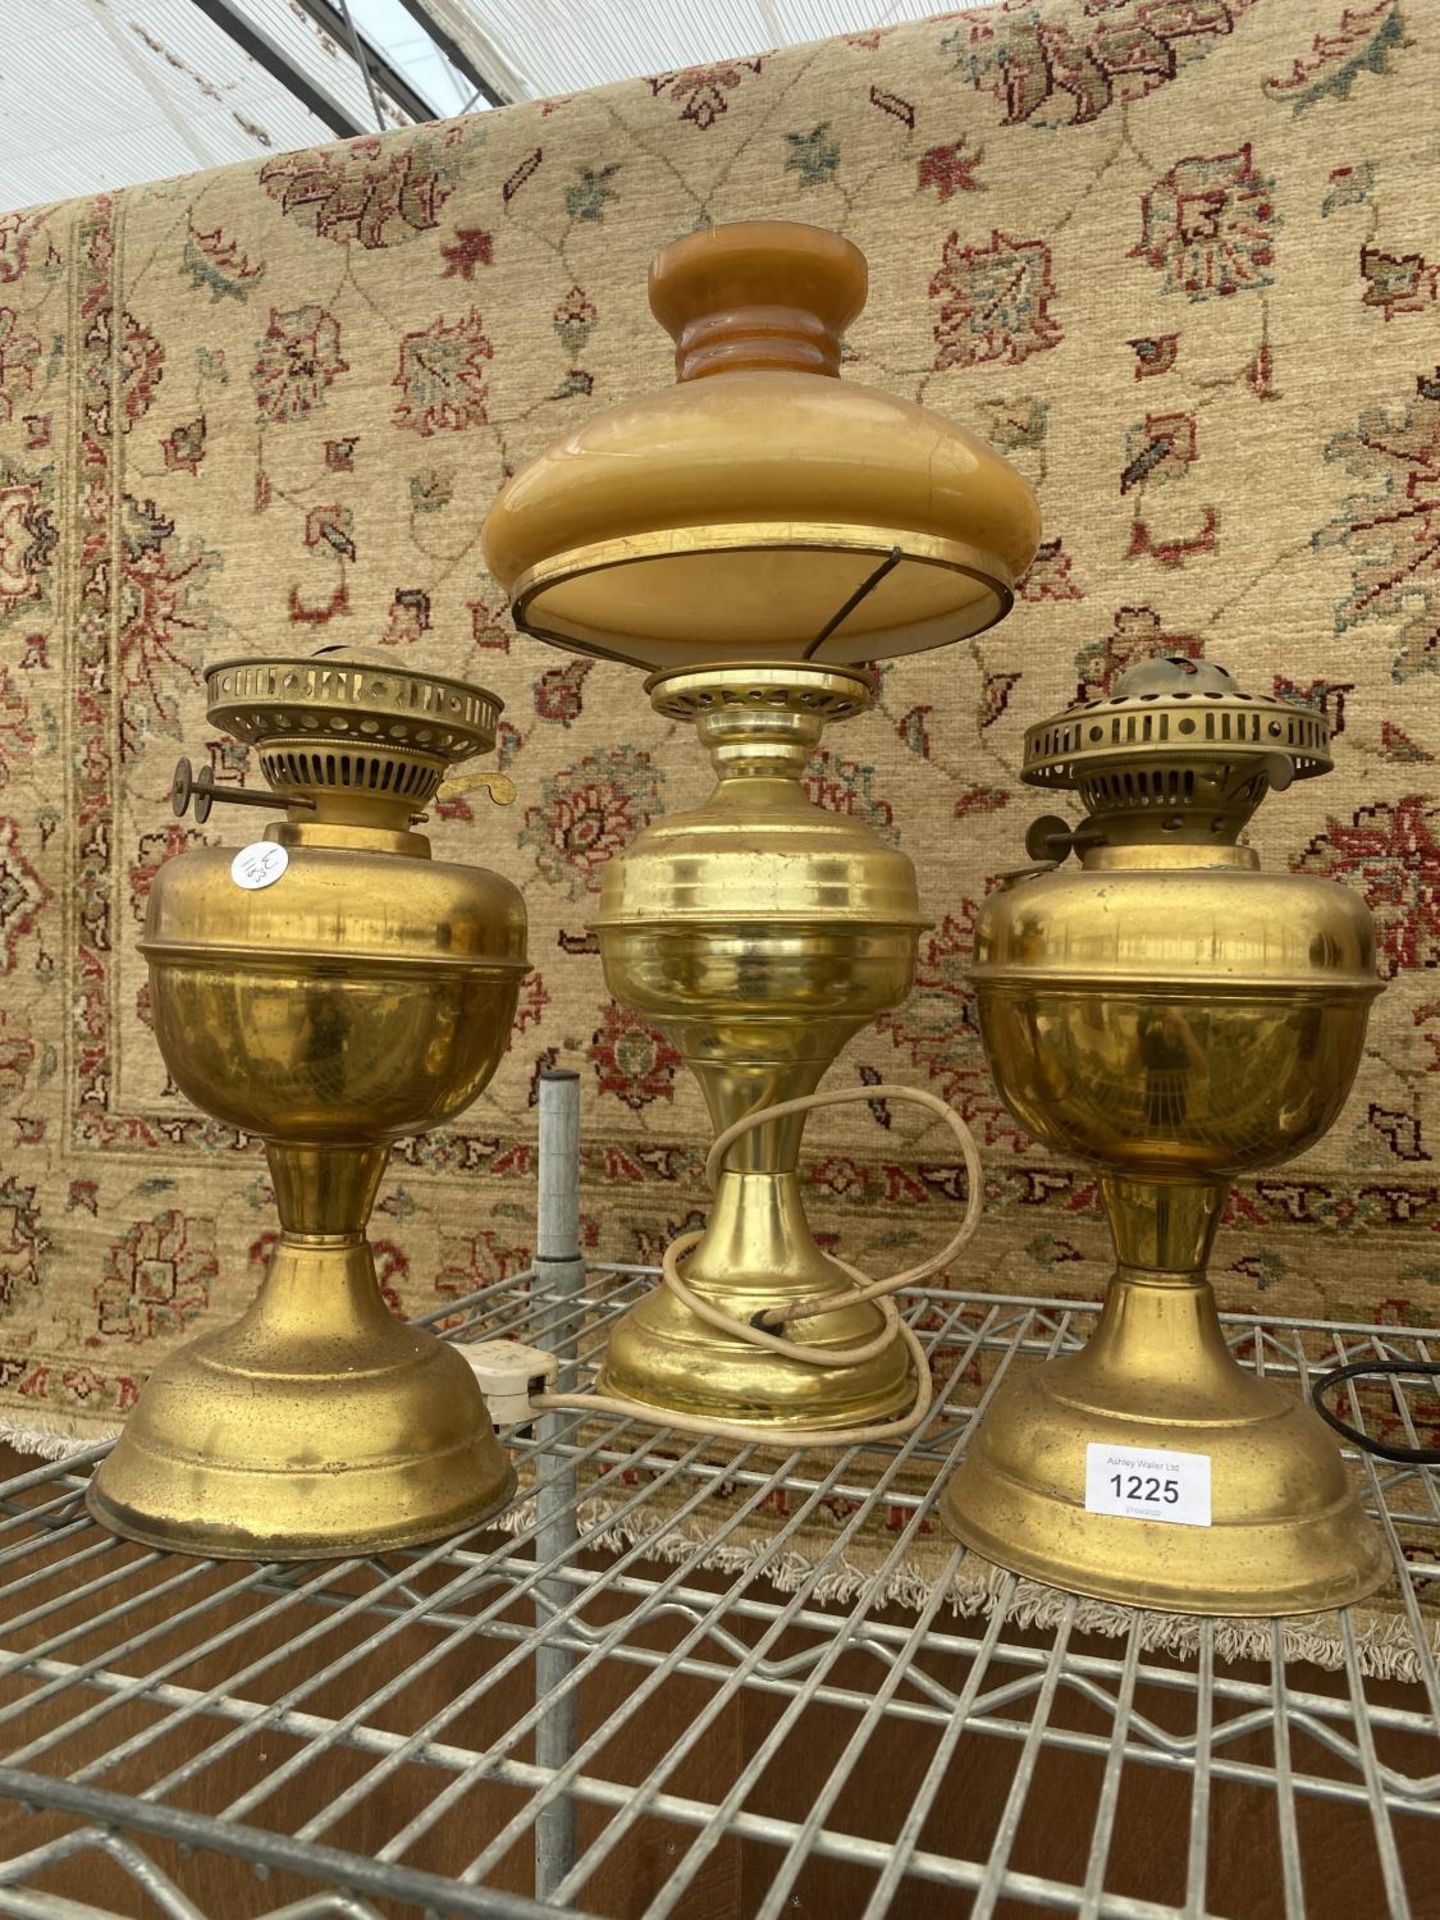 THREE VINTAGE BRASS OIL LAMPS TO INCLUDE ONE CONVERTED TO ELECTRIC WITH A GLASS SHADE